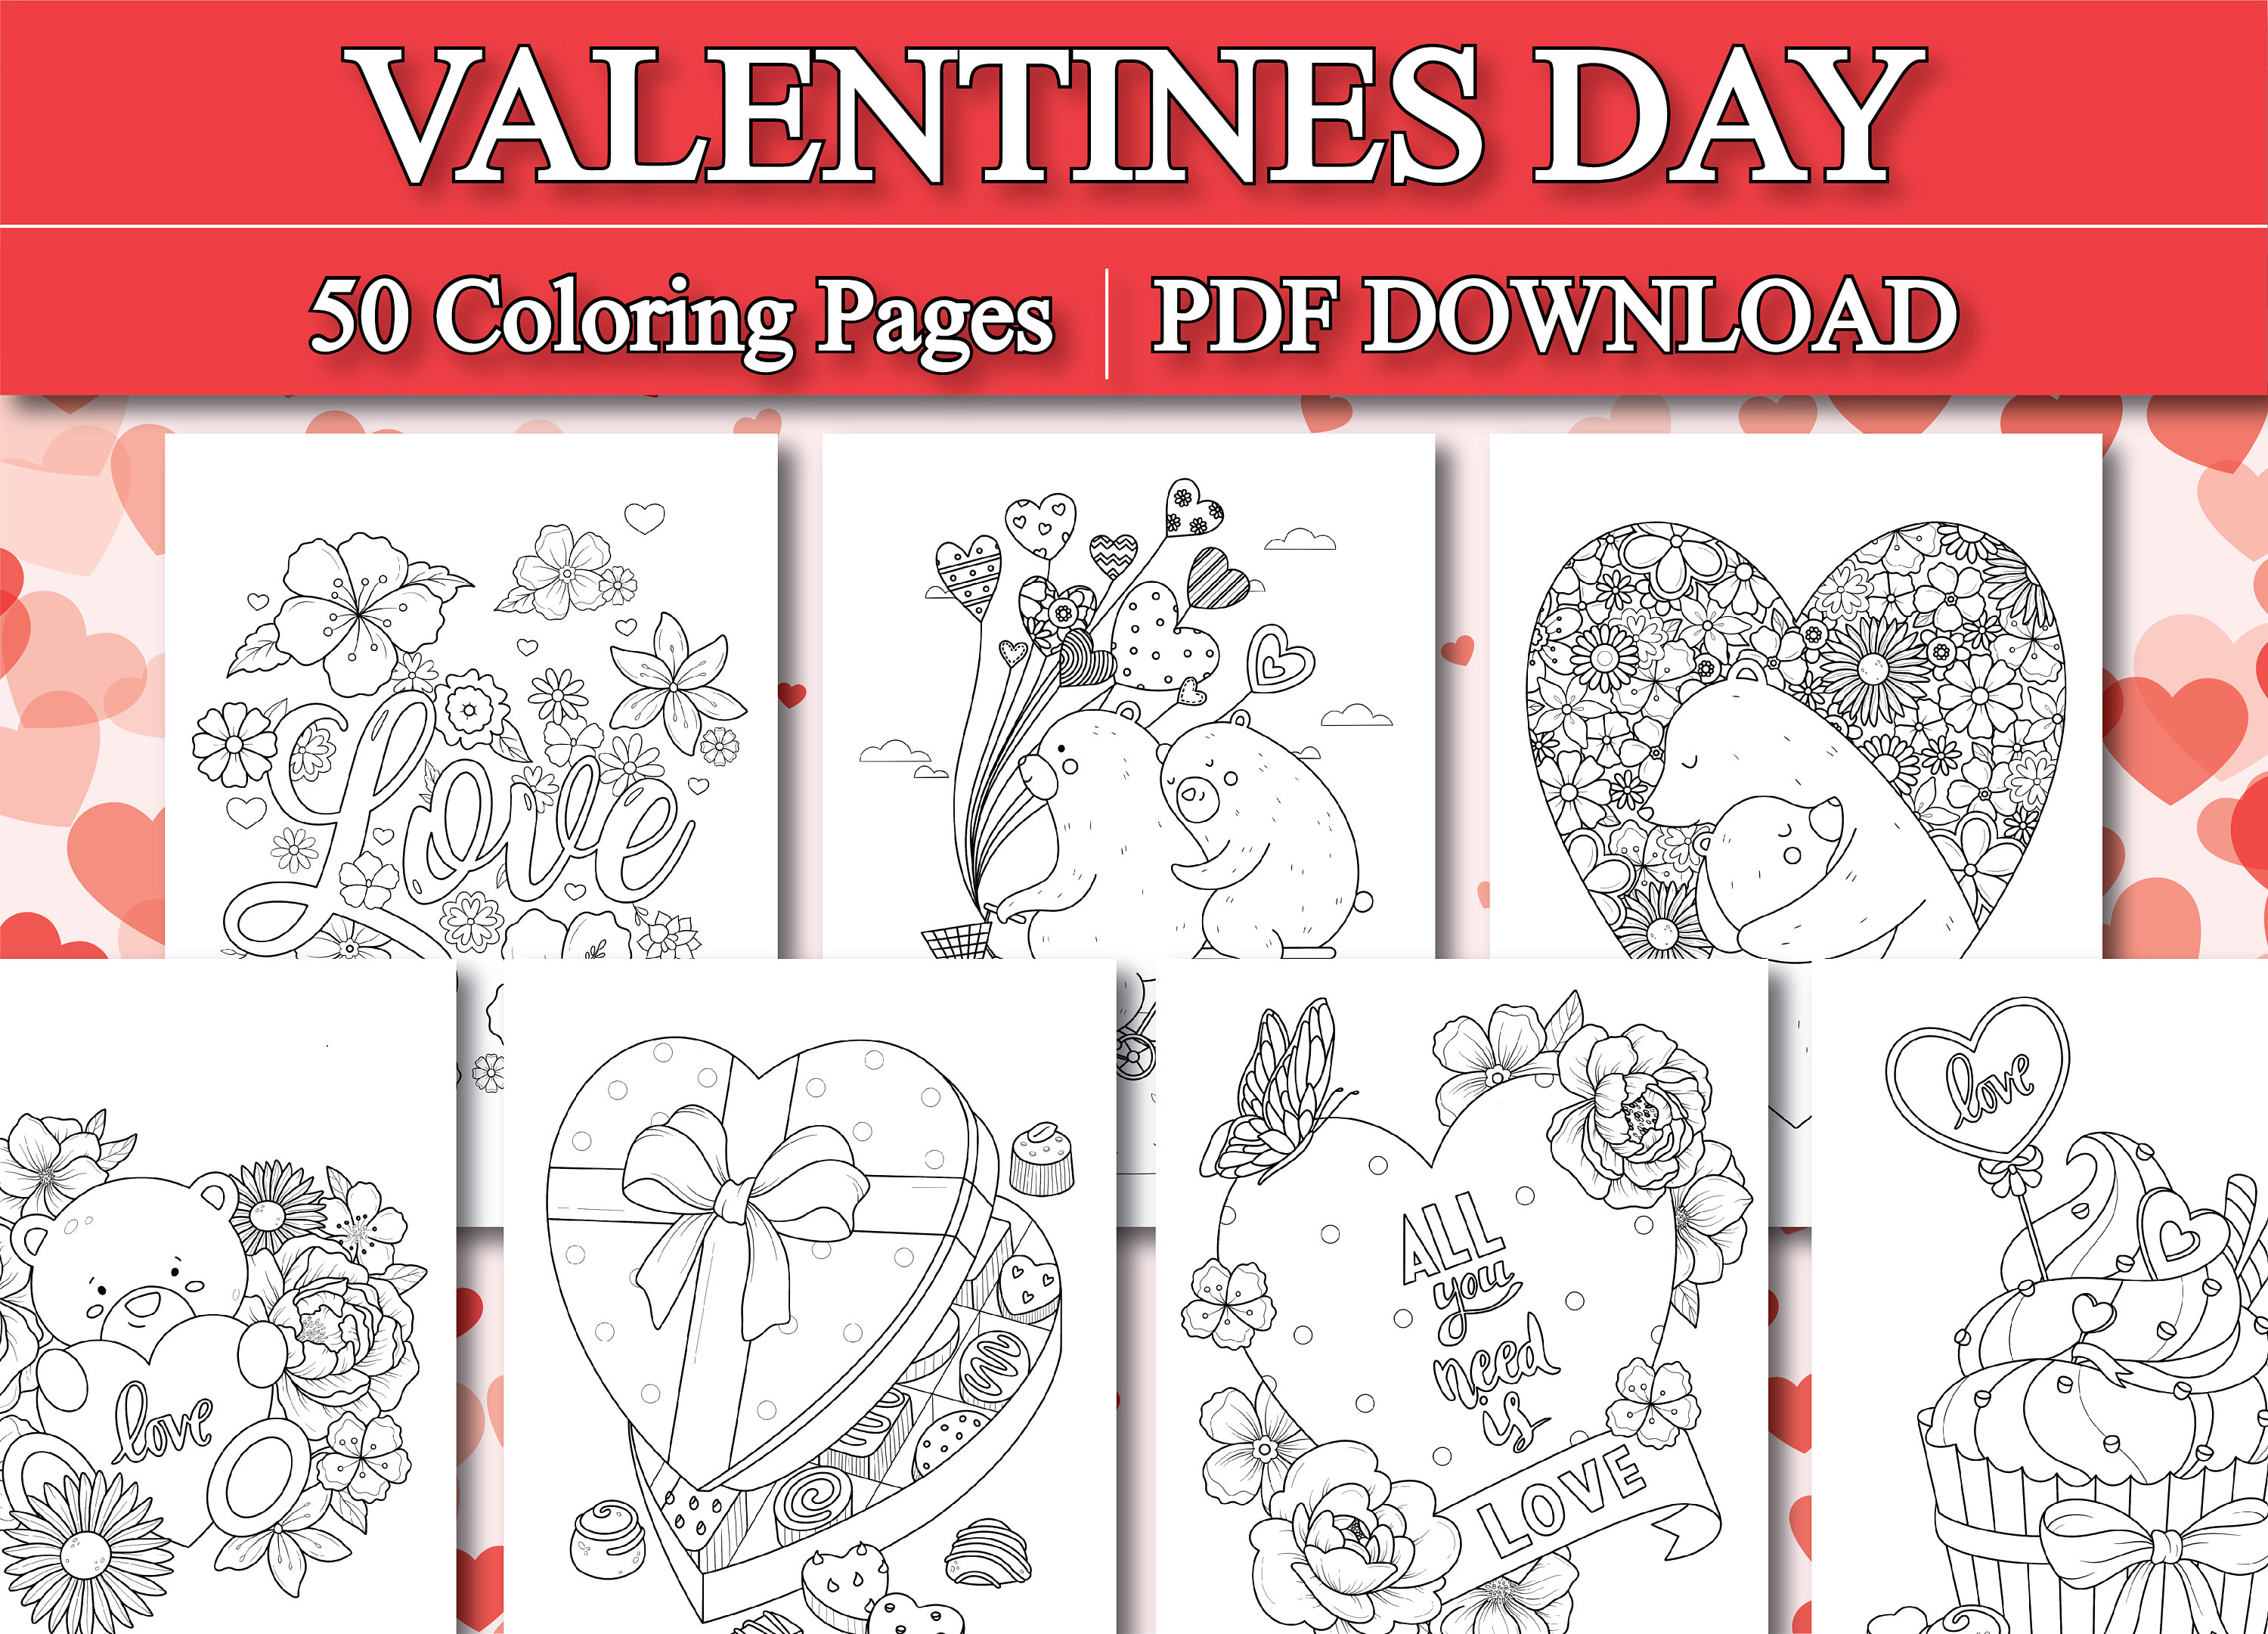 Valentines day coloring pages love coloring pages digital coloring pages printable pdf download